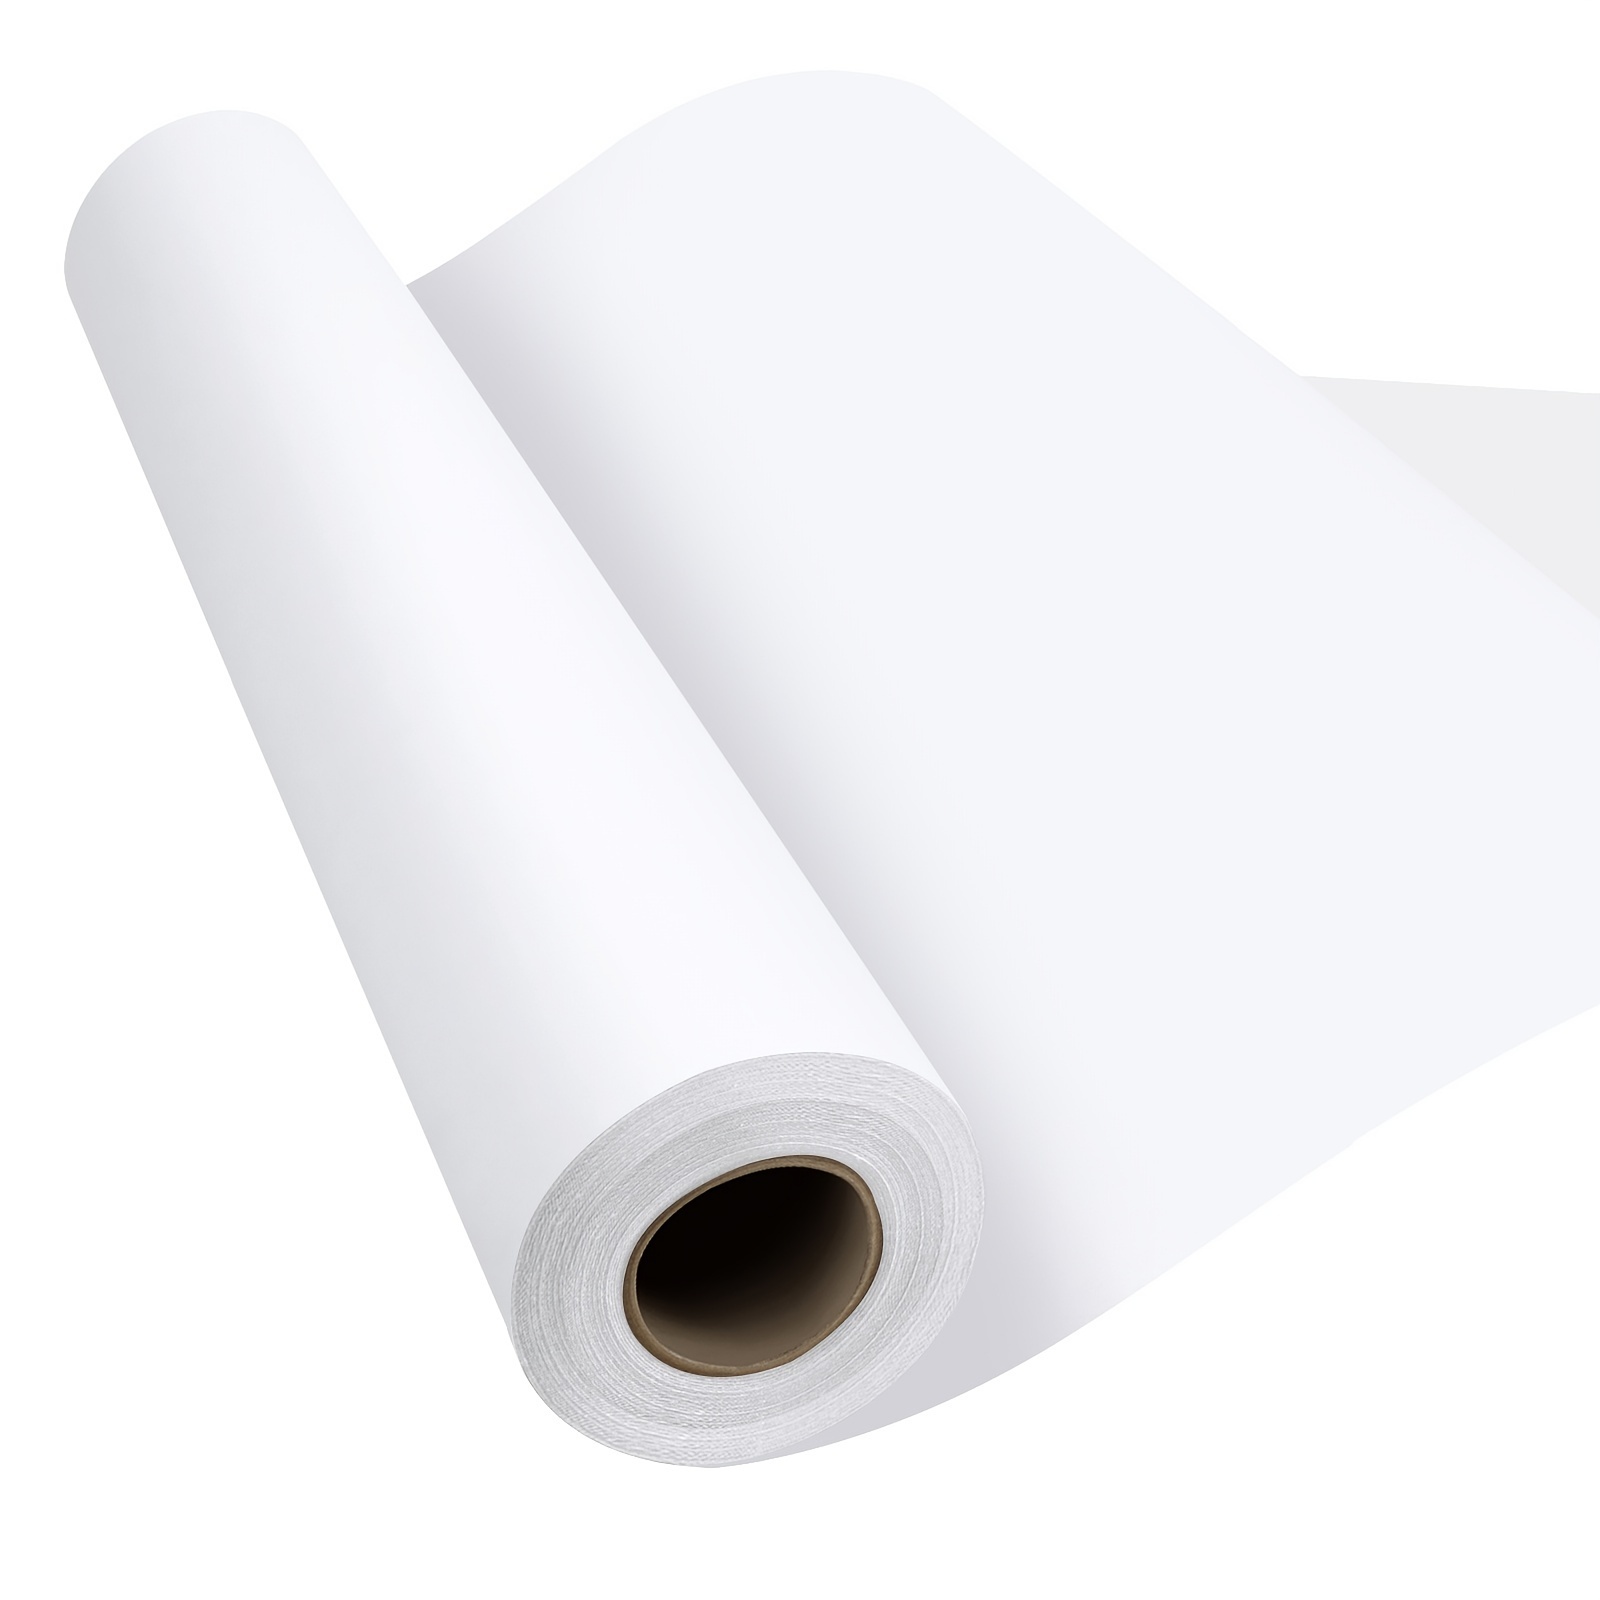 2 Rolls White Sketch Paper Roll White Easel Paper White Construction Paper  Roll